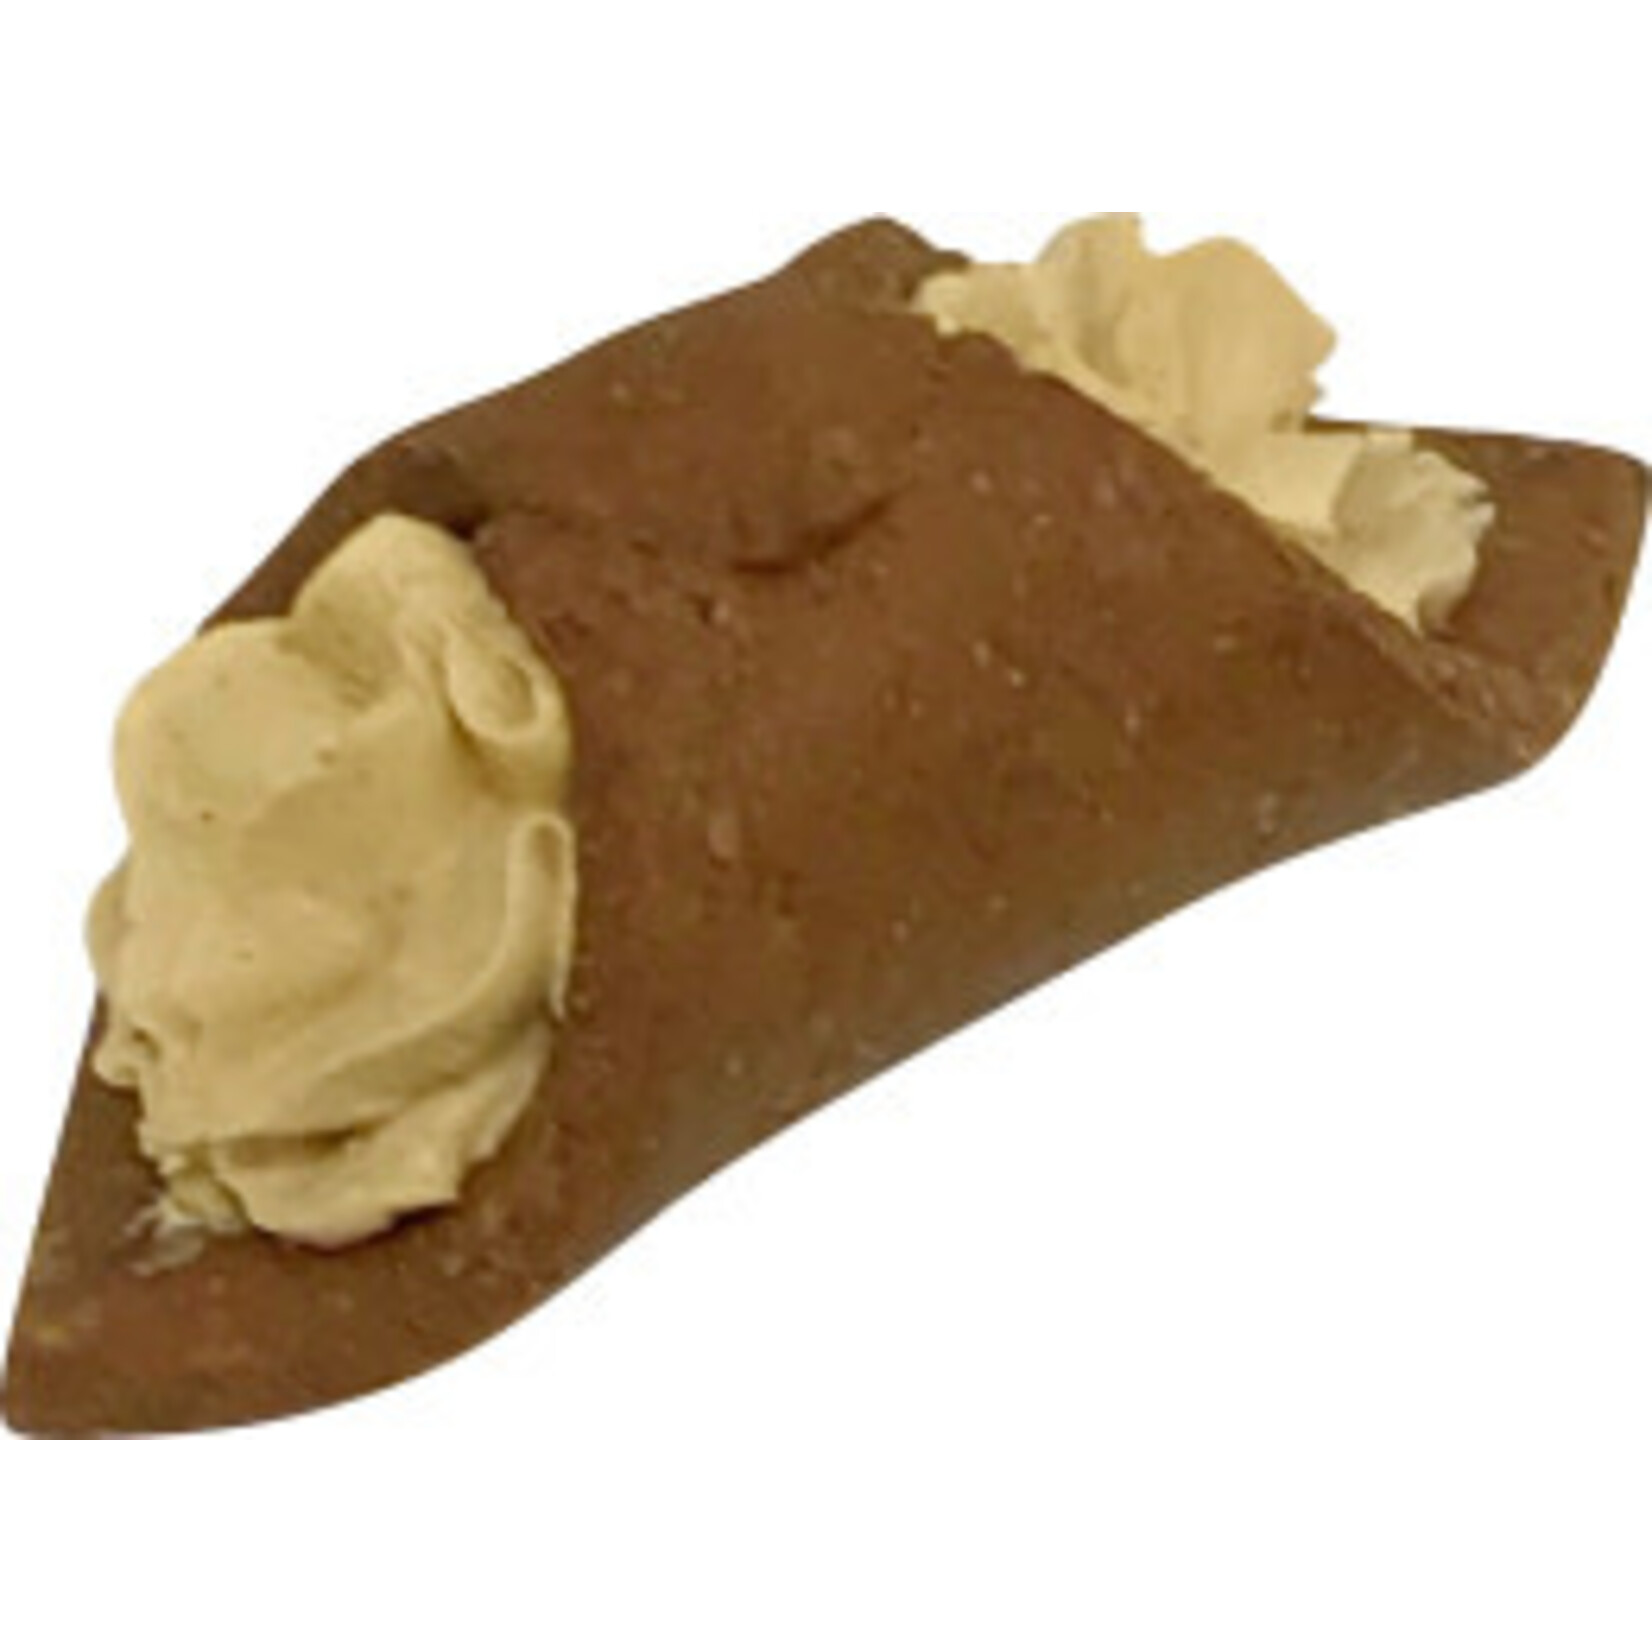 Preppy Puppy Bakery Peanut Butter Cannoli for Dogs